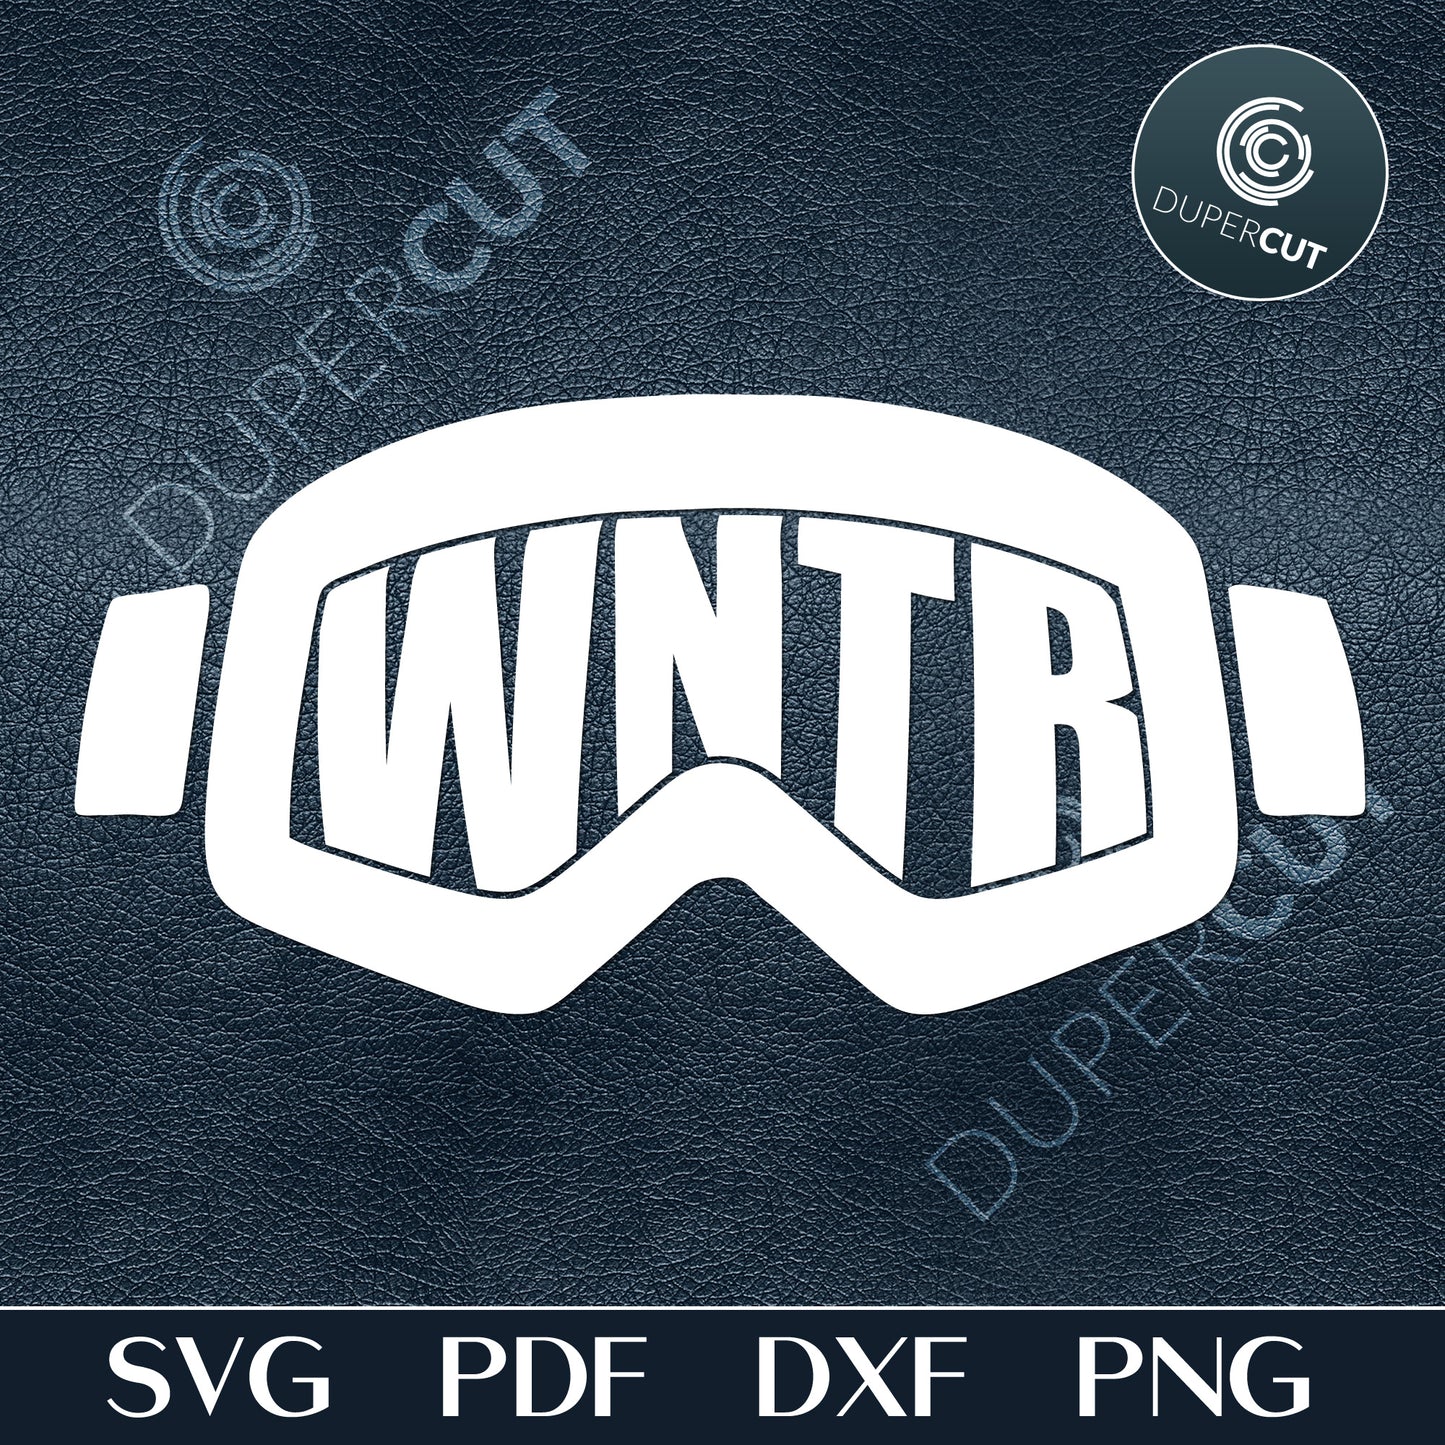 WNTR extreme sports goggles, skiing, snowmobiling, snowboarding phrases. Paper cutting template SVG PNG DXF files. For DIY projects Cricut, Glowforge, Silhouette Cameo, CNC Machines.